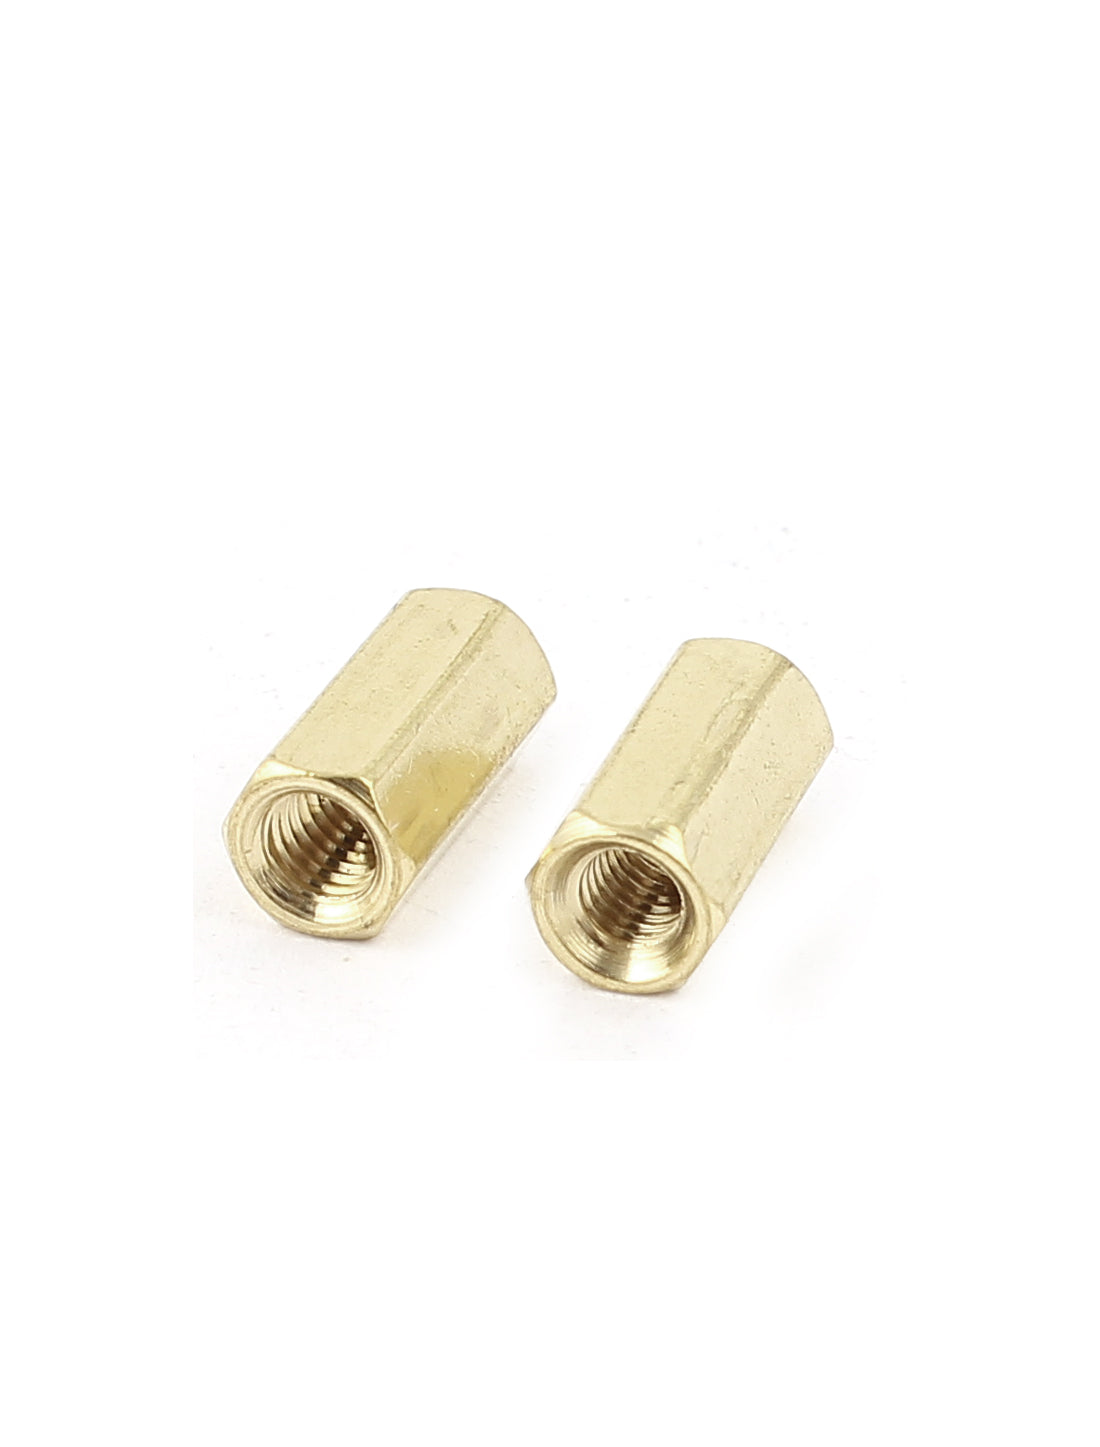 uxcell Uxcell M3 x 10mm Female/Female Thread Brass Hex Standoff PCB Pillar Spacer 10pcs